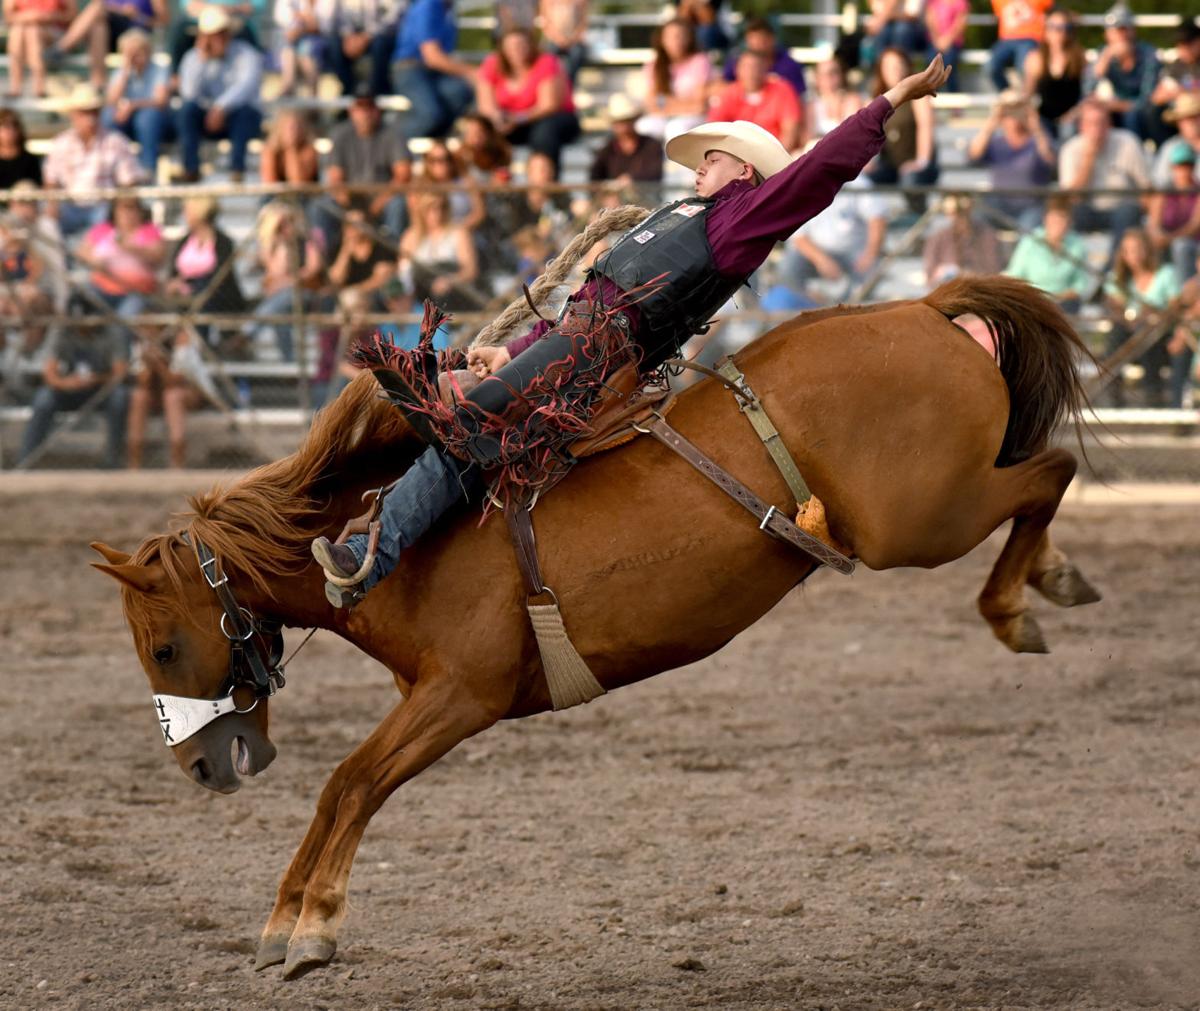 Last Ride Bronc riders steal show at Missoula Stampede final night